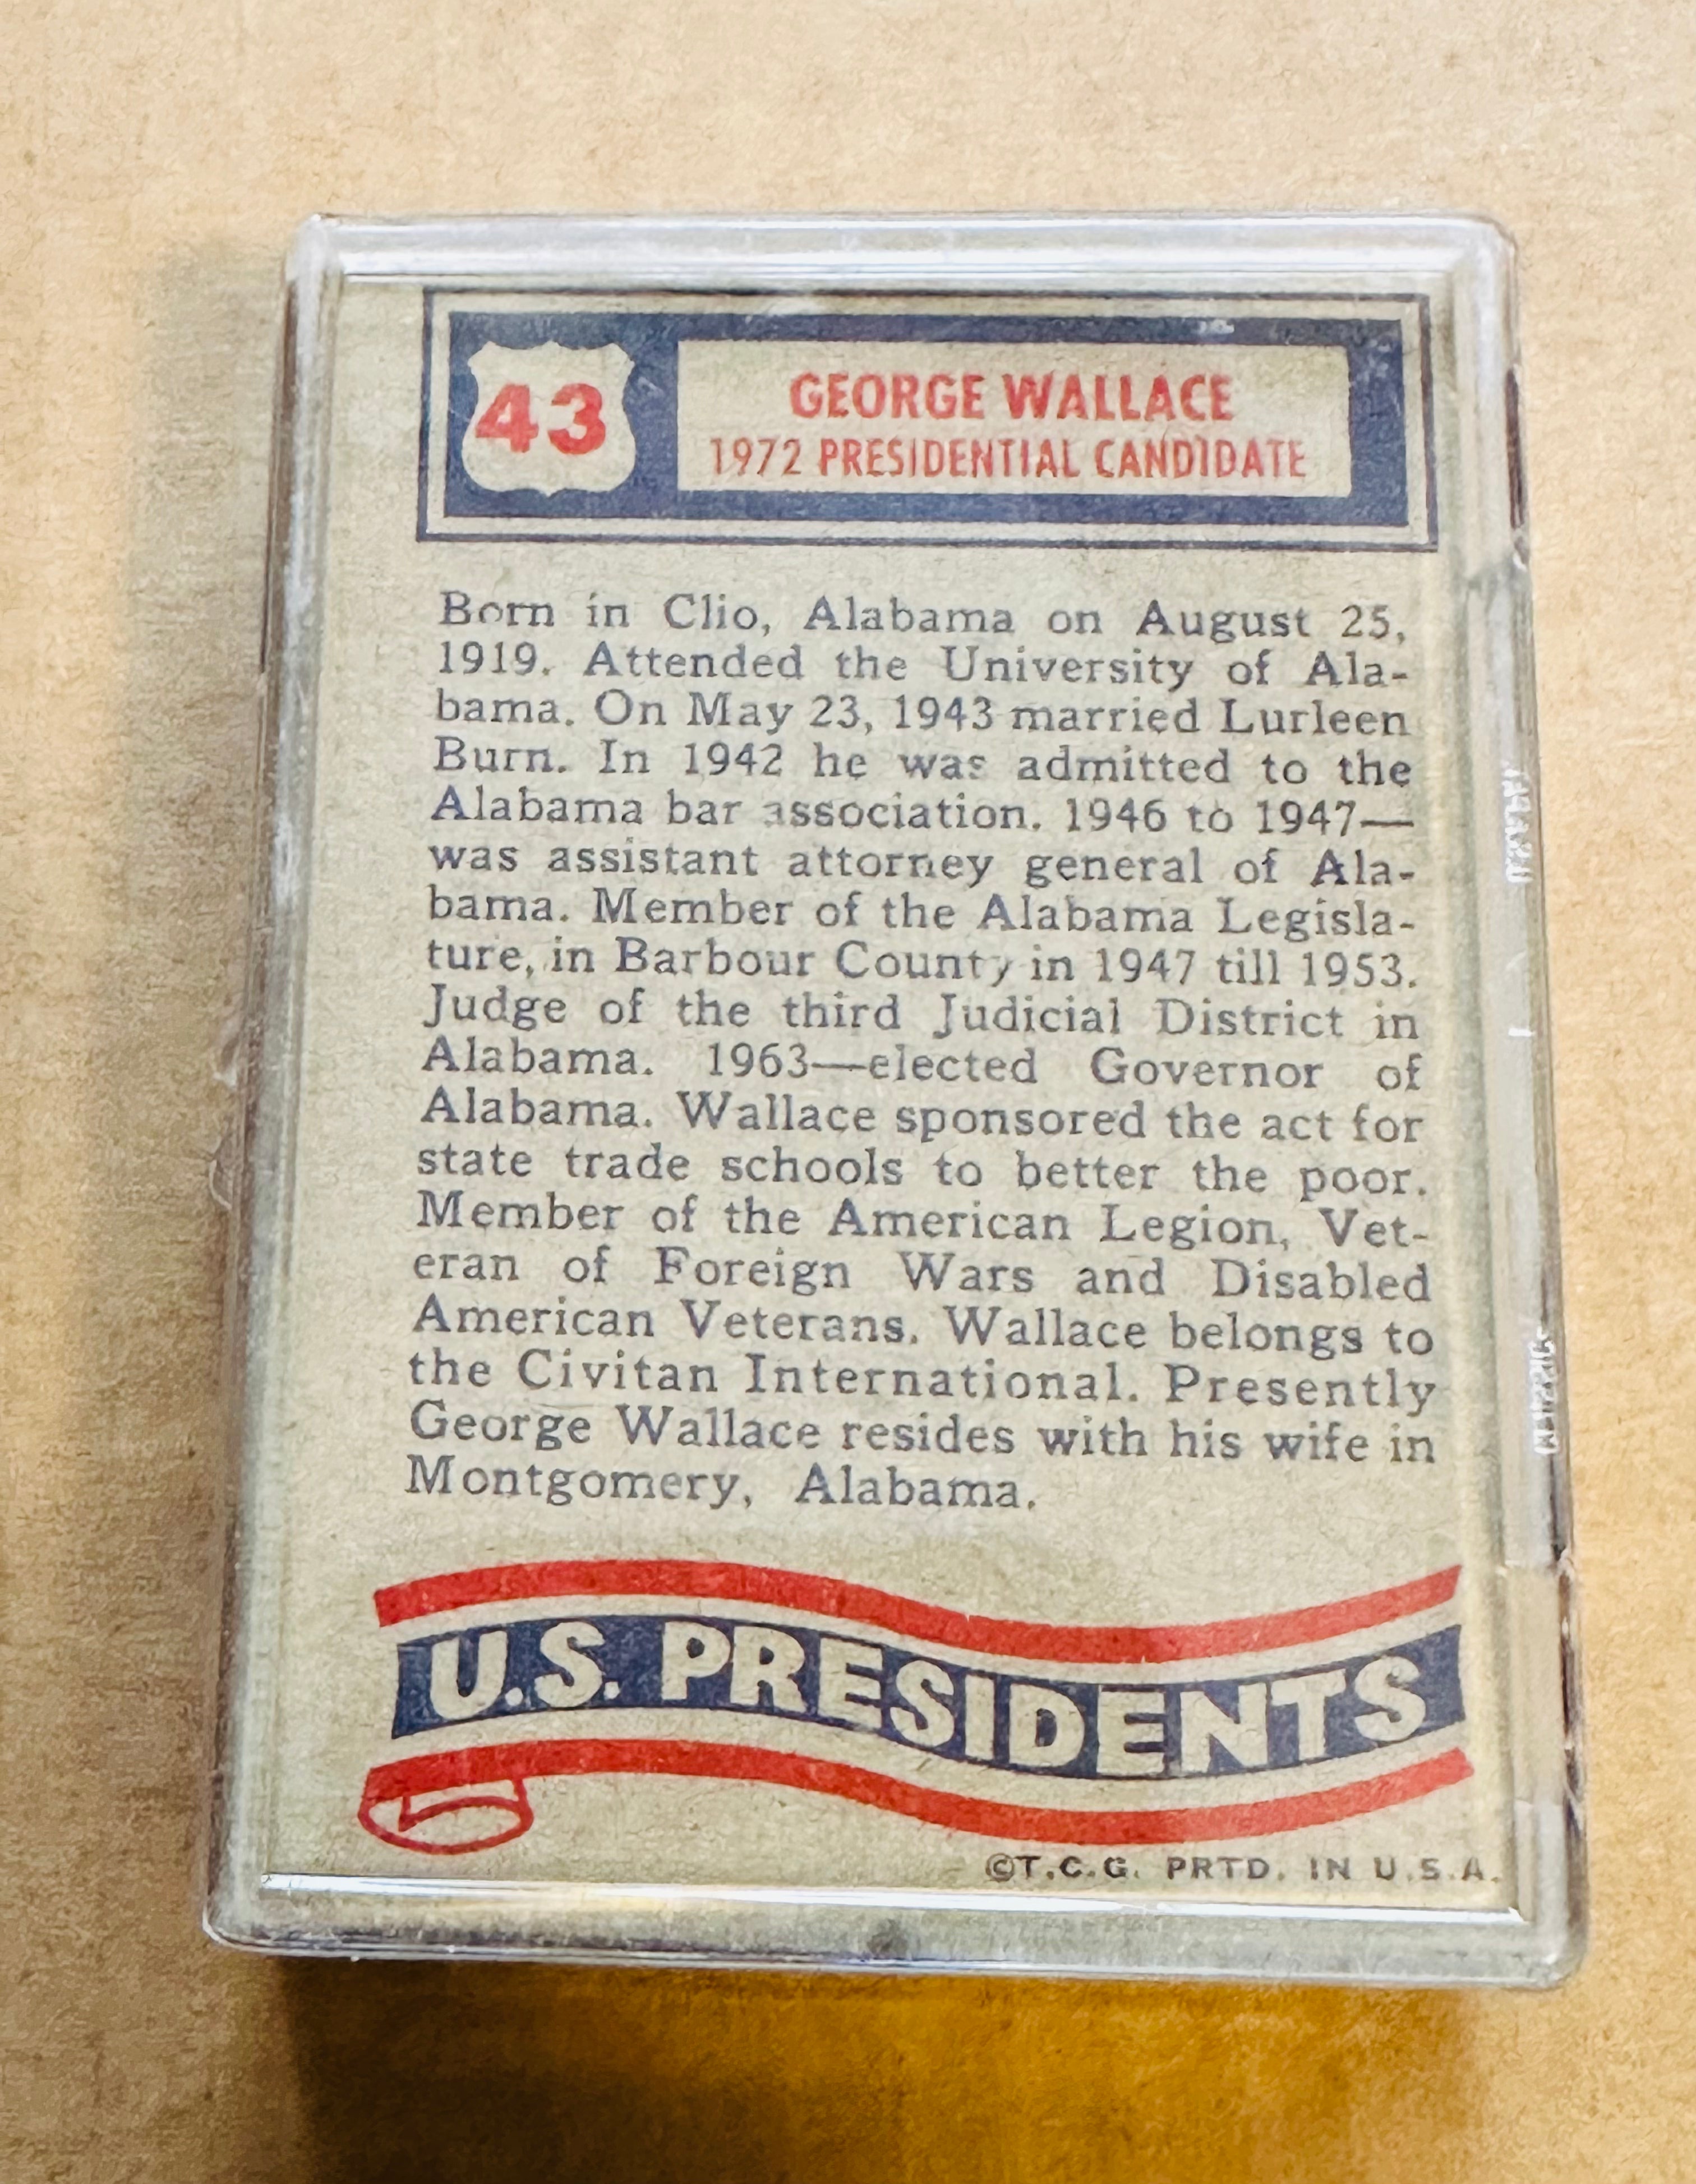 U.S. Presidents cards set with wrapper 1972